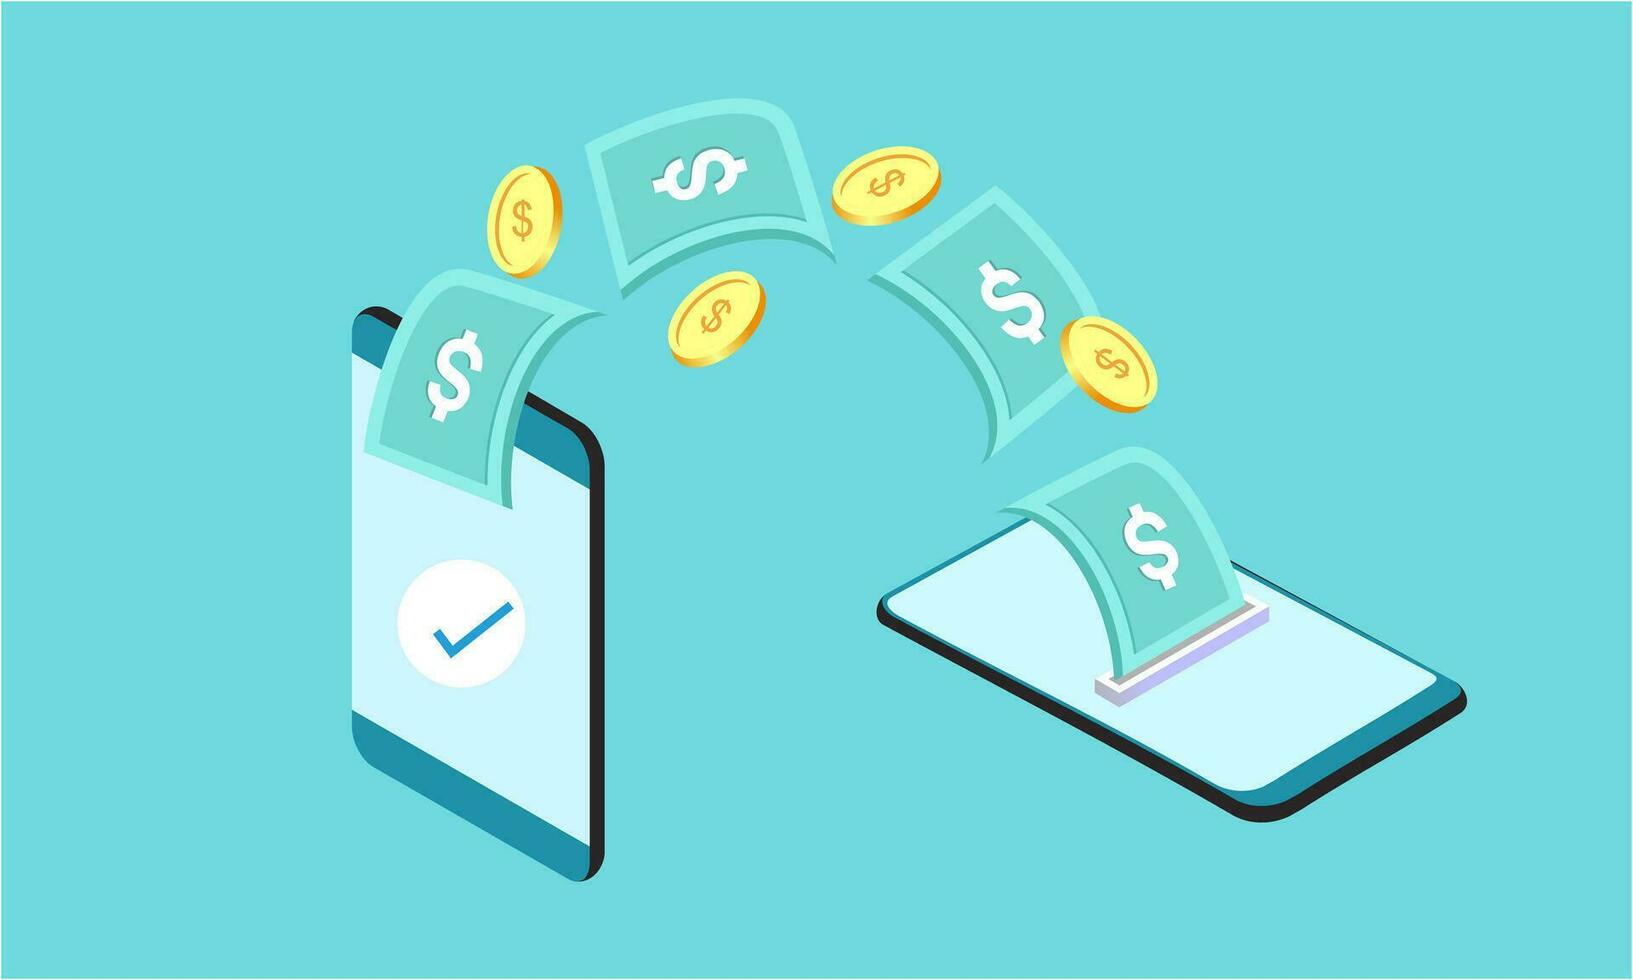 People sending and receiving money wireless with their mobile phones illustration vector